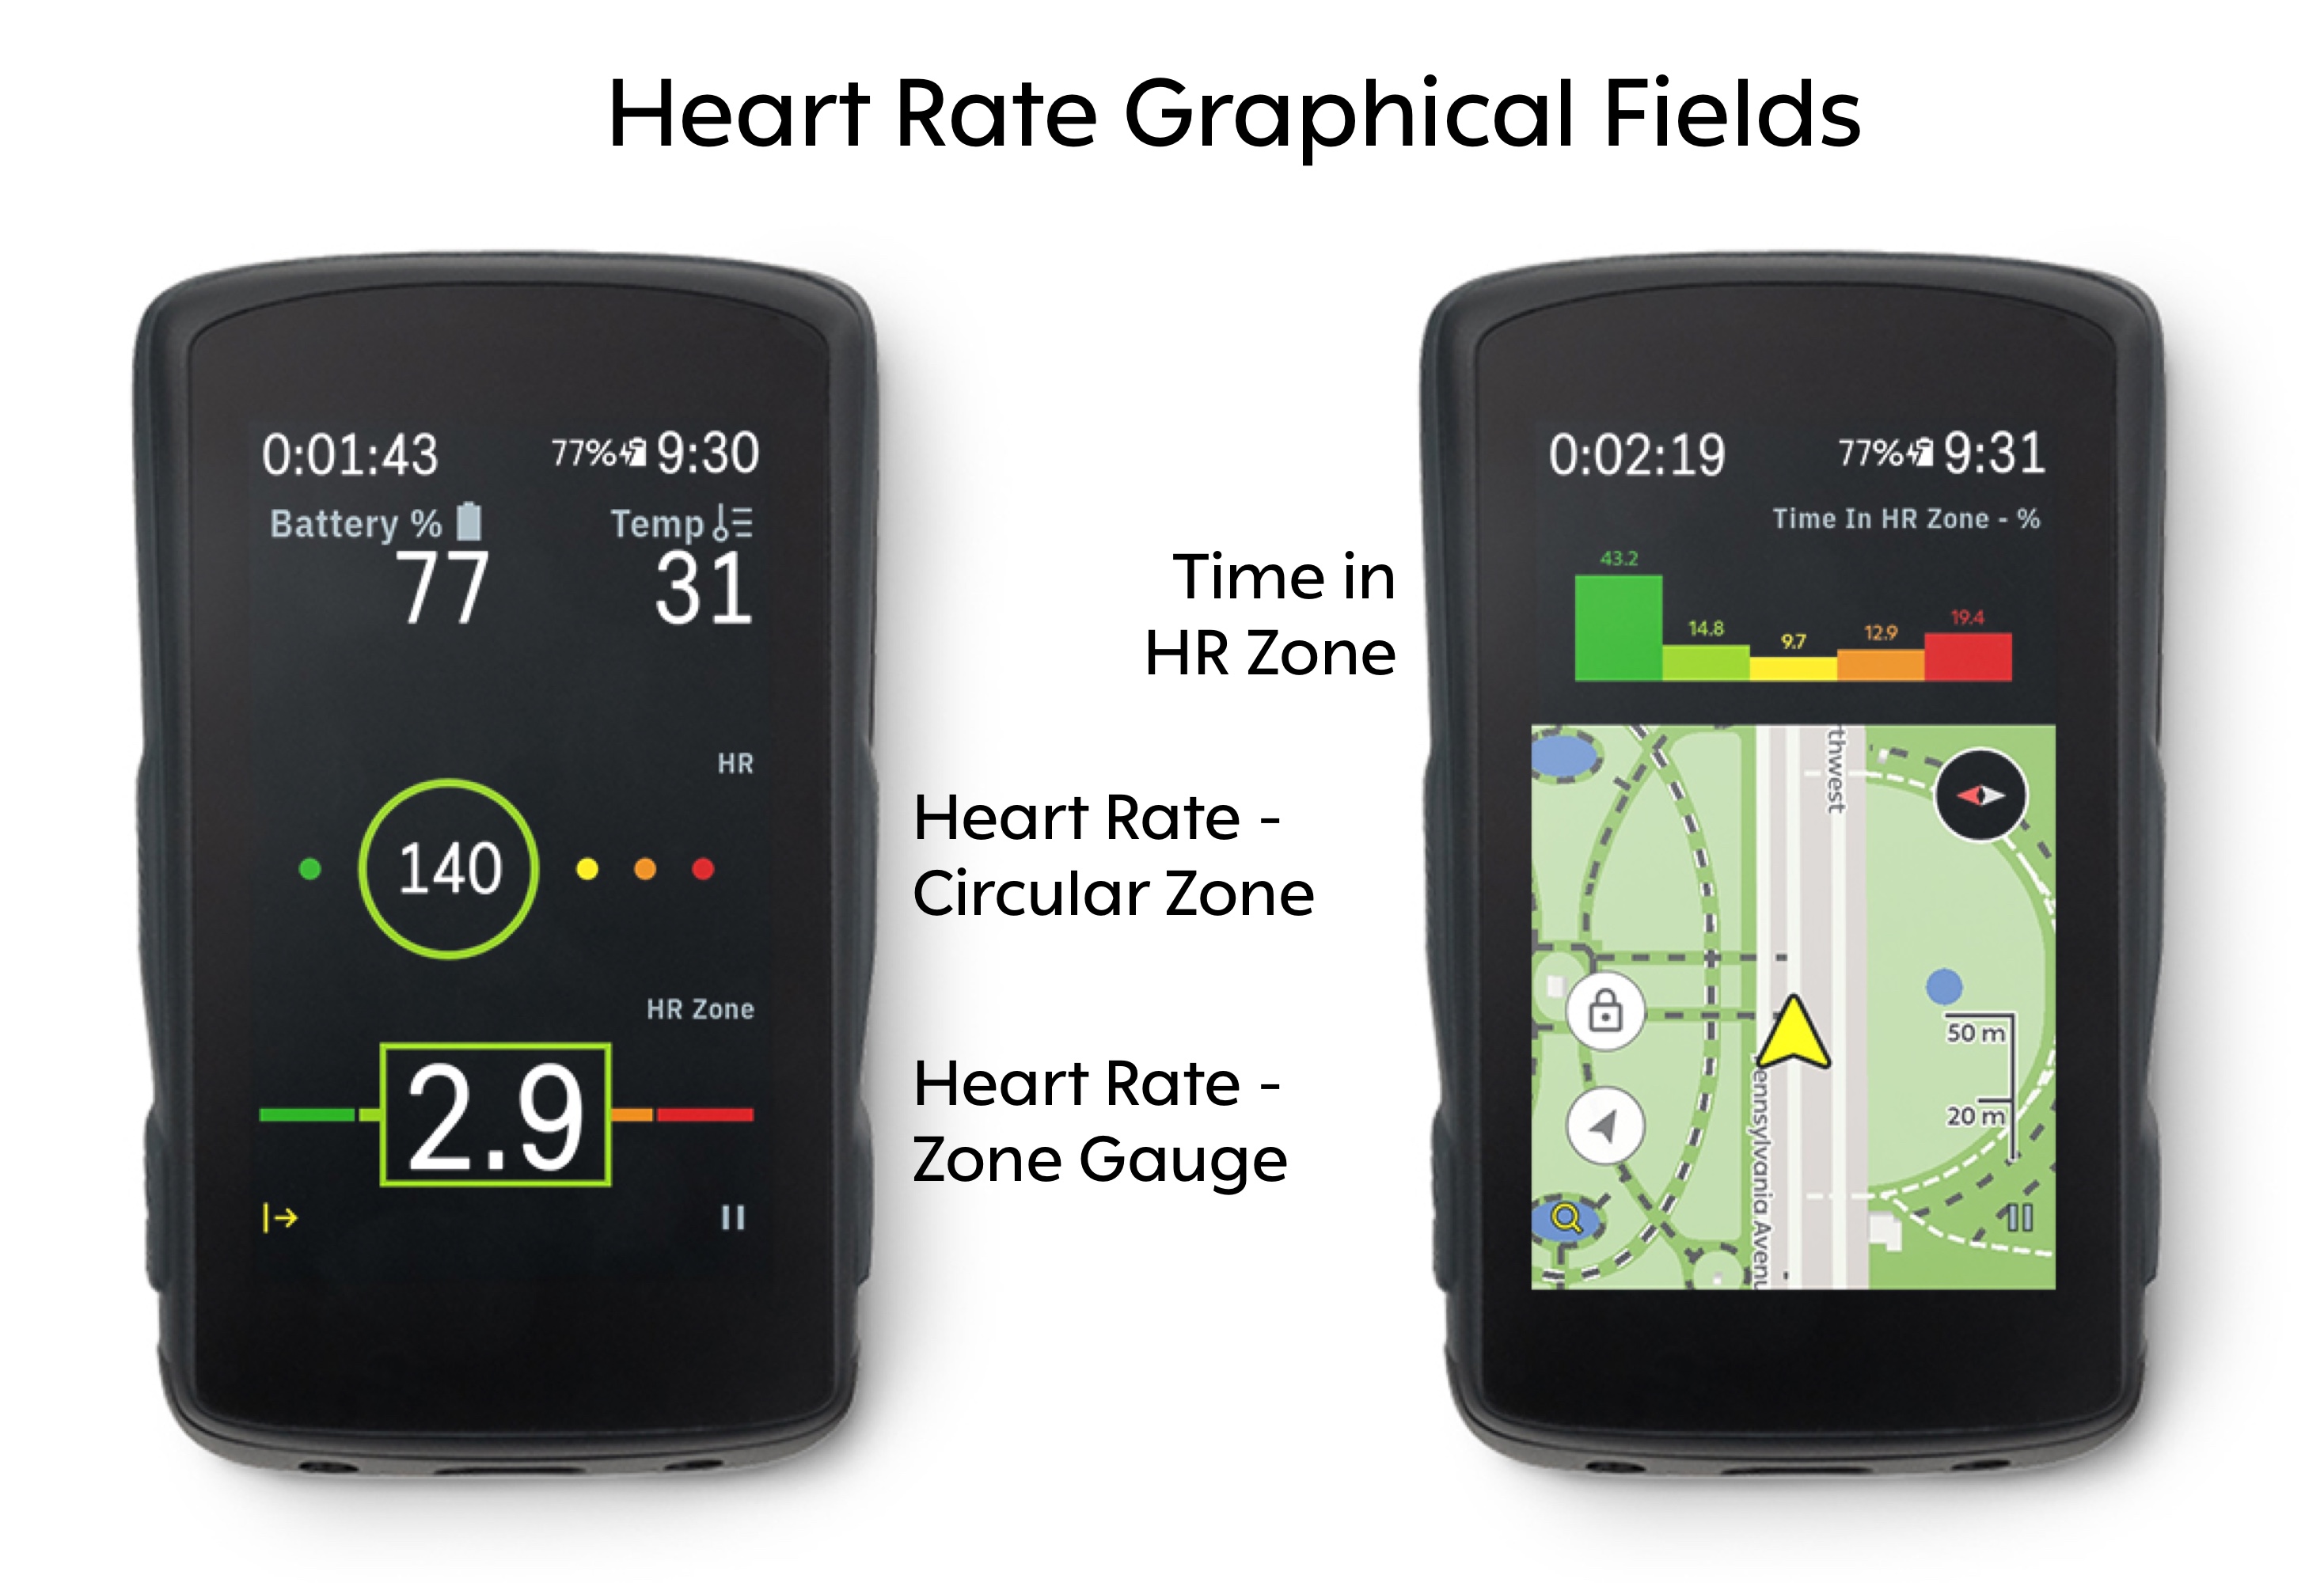 K2_-_Heart_Rate_Graphical_Fields.jpg